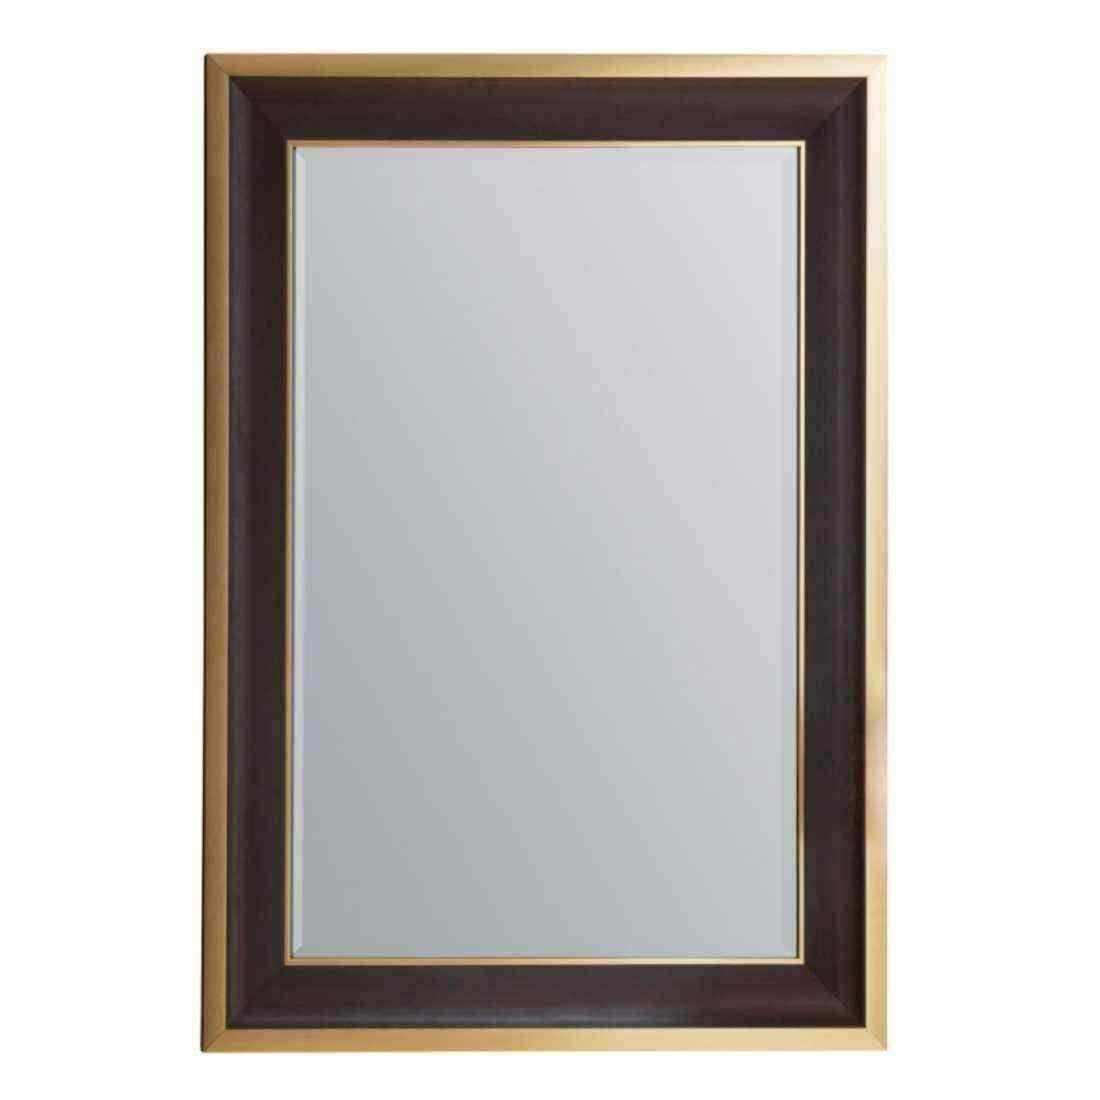 Sophisticated Gold and Black Rectangular Wall Mirror - The Farthing